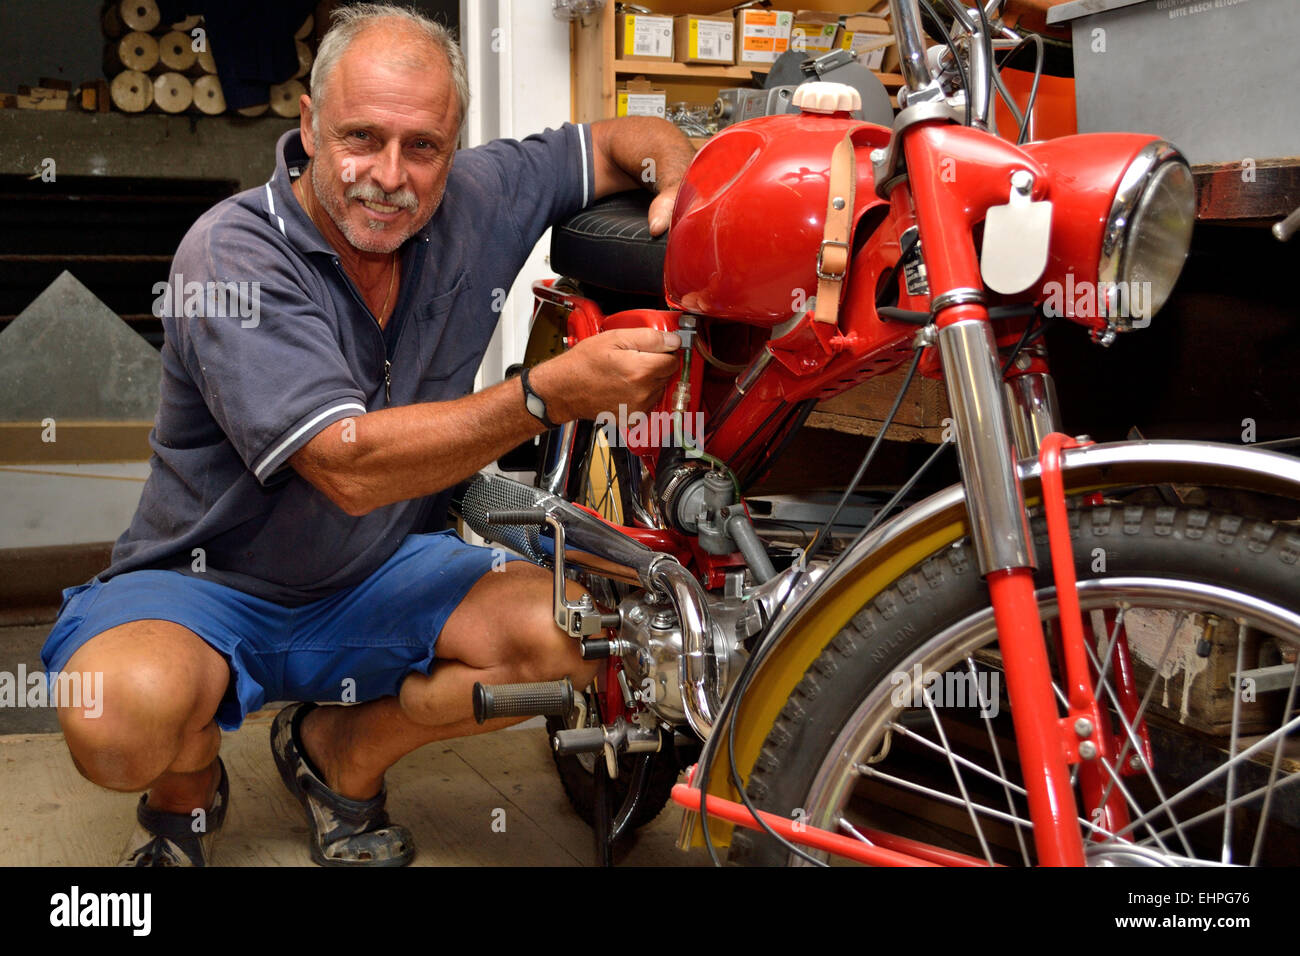 The scooter mechanic service Stock Photo